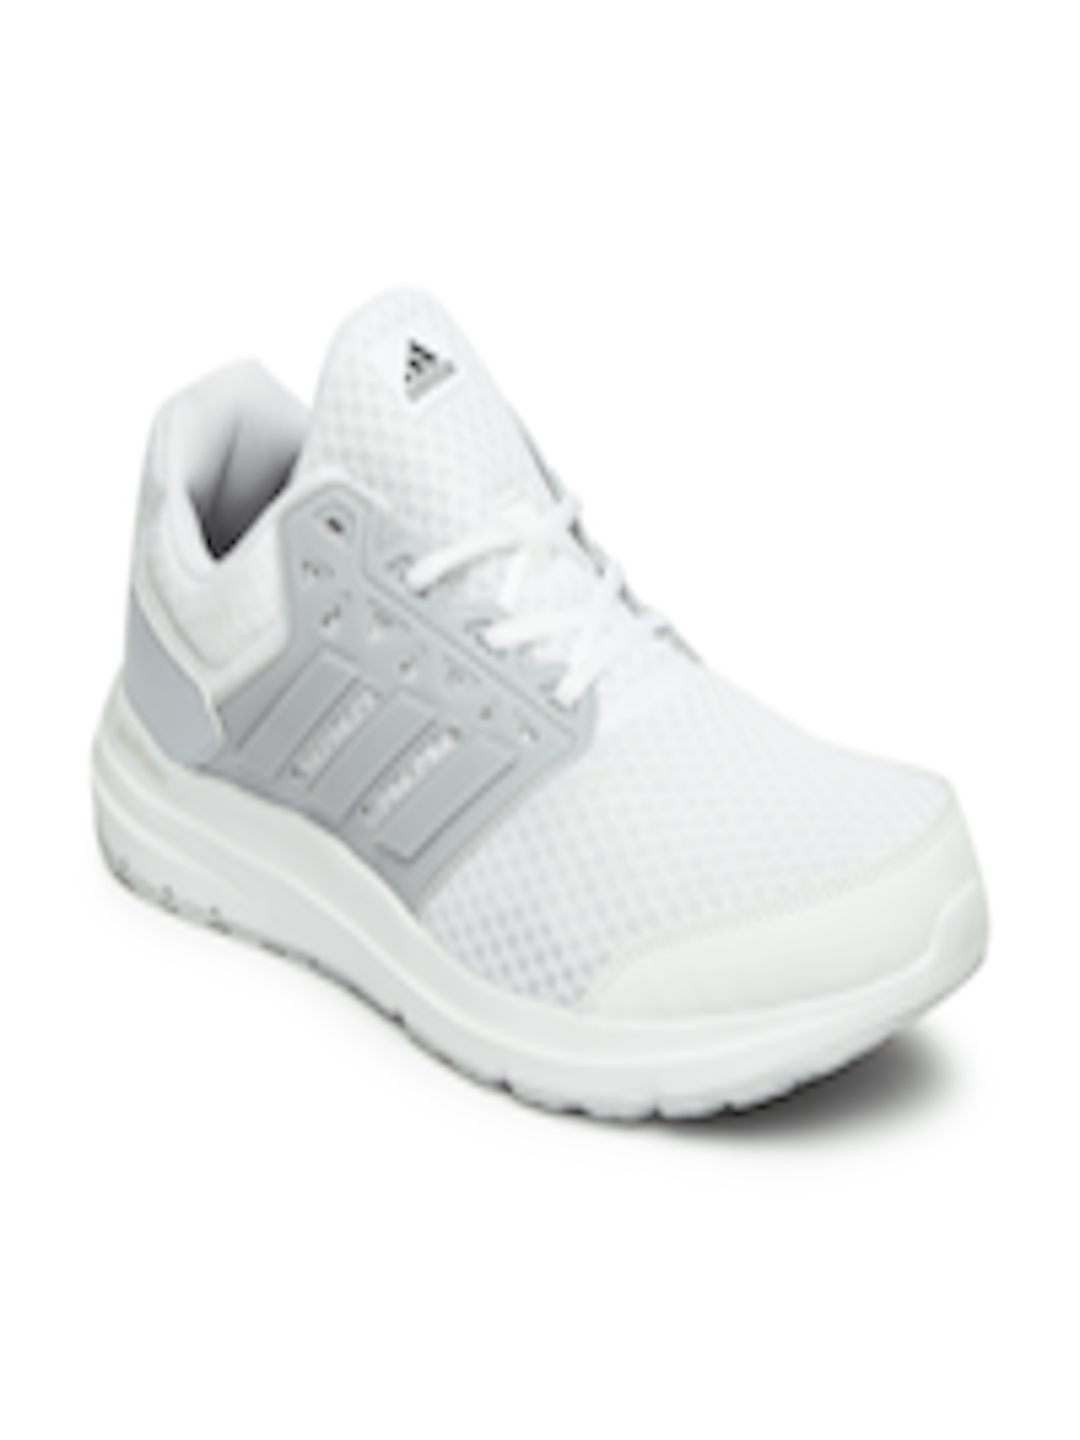 Buy ADIDAS Men White GALAXY 3 M Running Shoes - Sports Shoes for Men ...